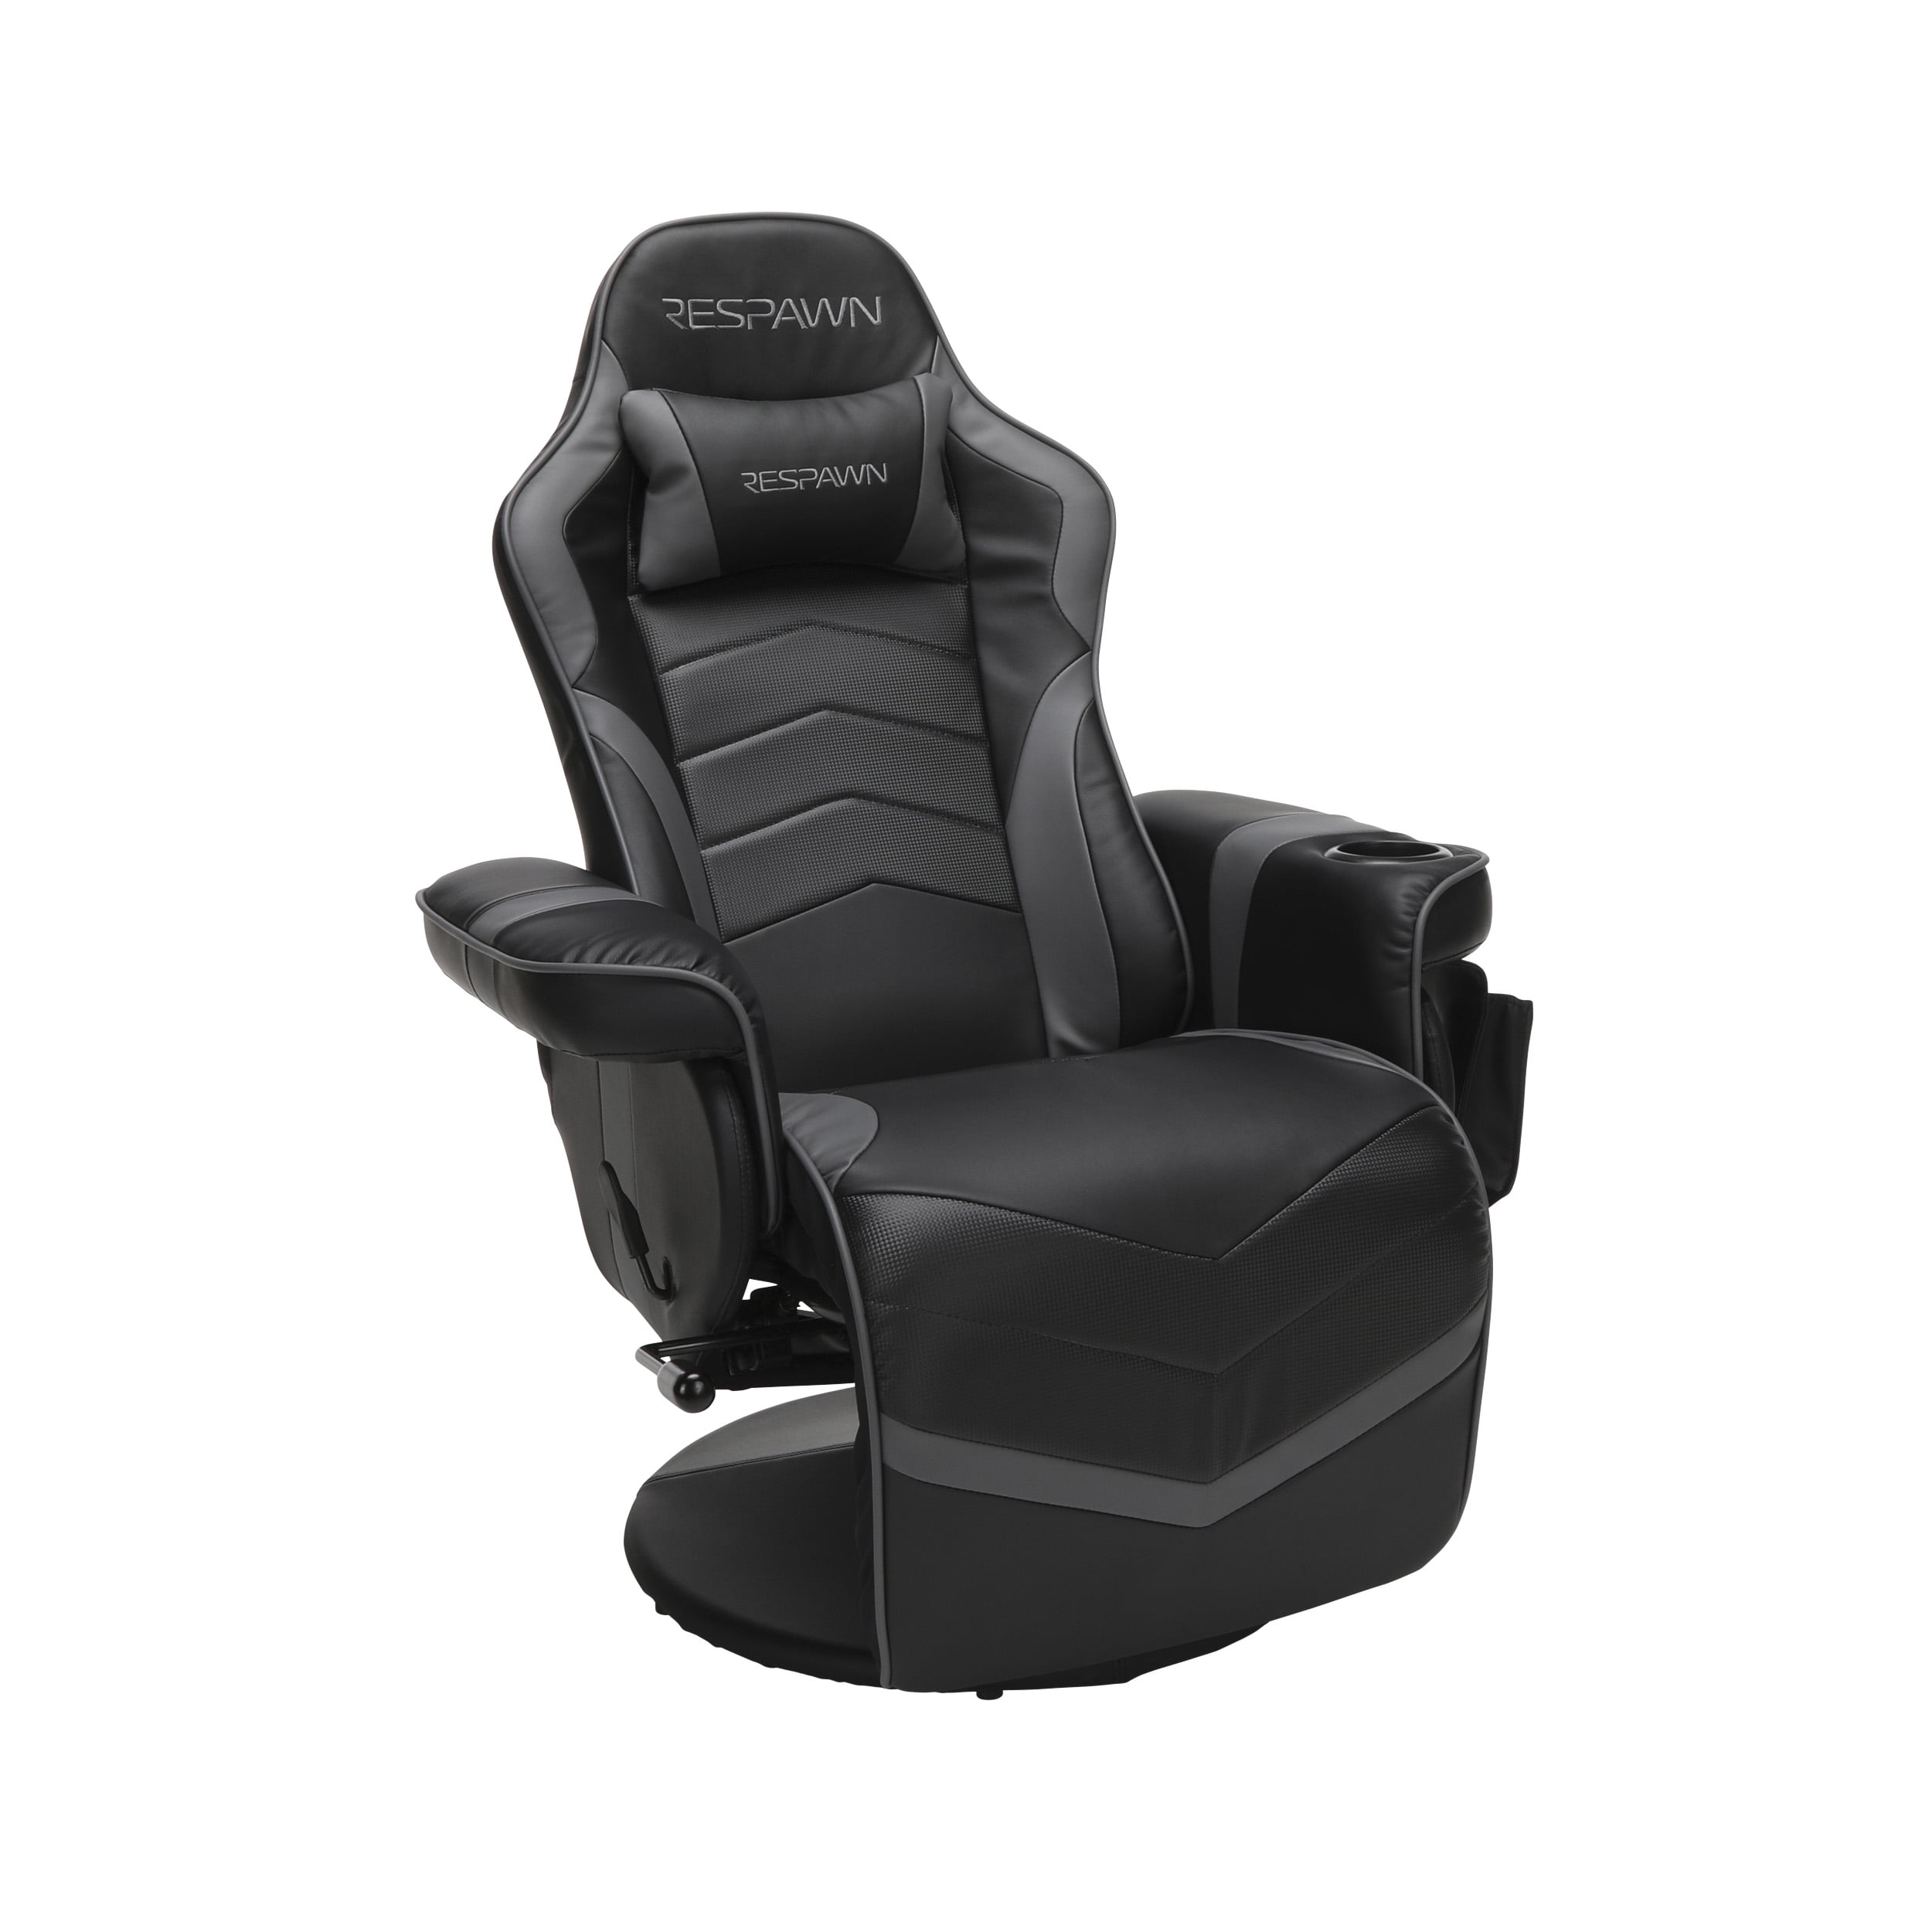 RESPAWN 900 Racing Style Gaming Recliner, Reclining Gaming Chair, in Gray (RSP-900-GRY) - Walmart.com